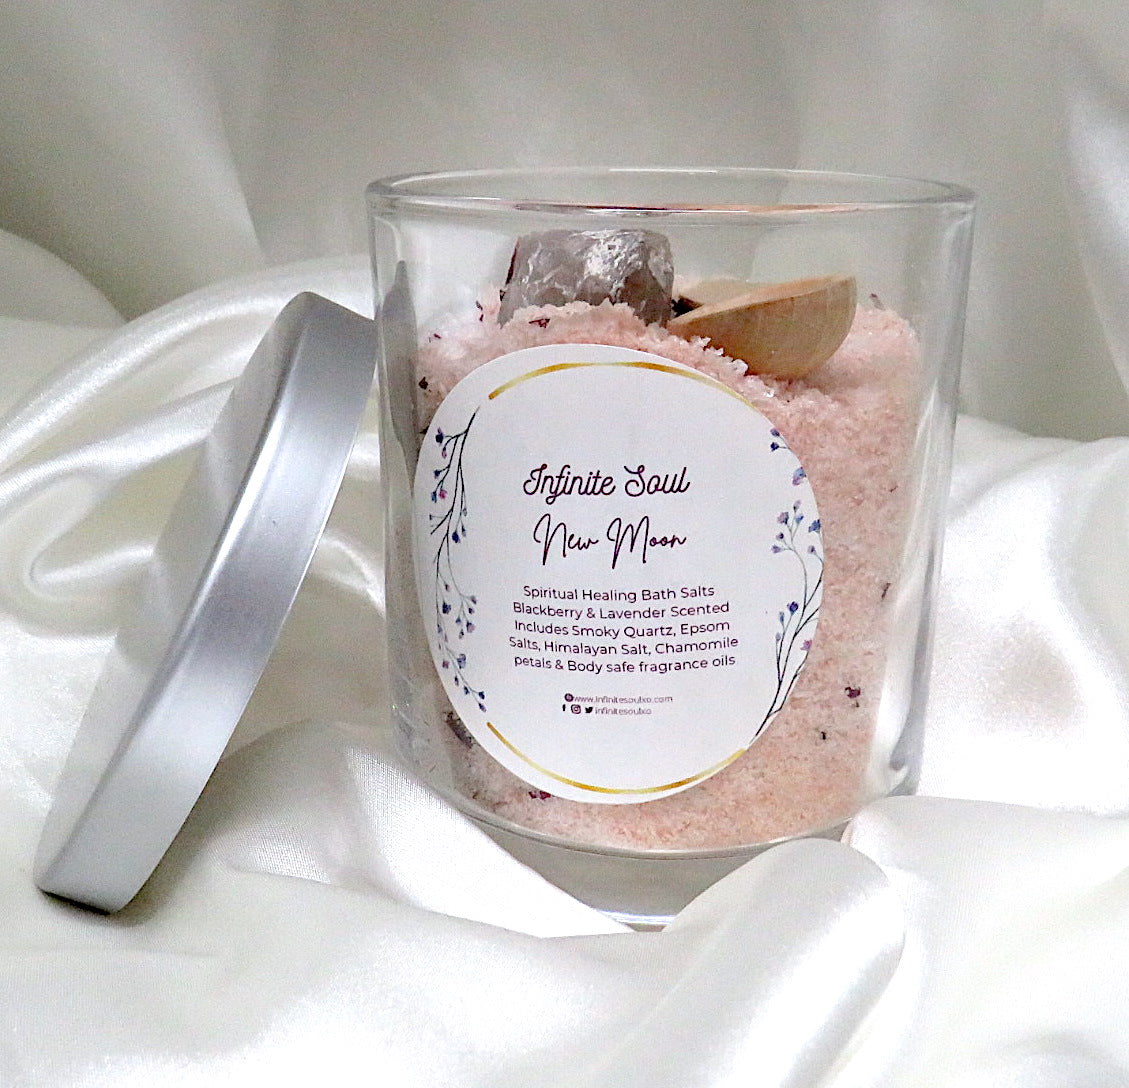 New Moon Crystal Infused Bath Salts - Blackberry & Lavender Scented